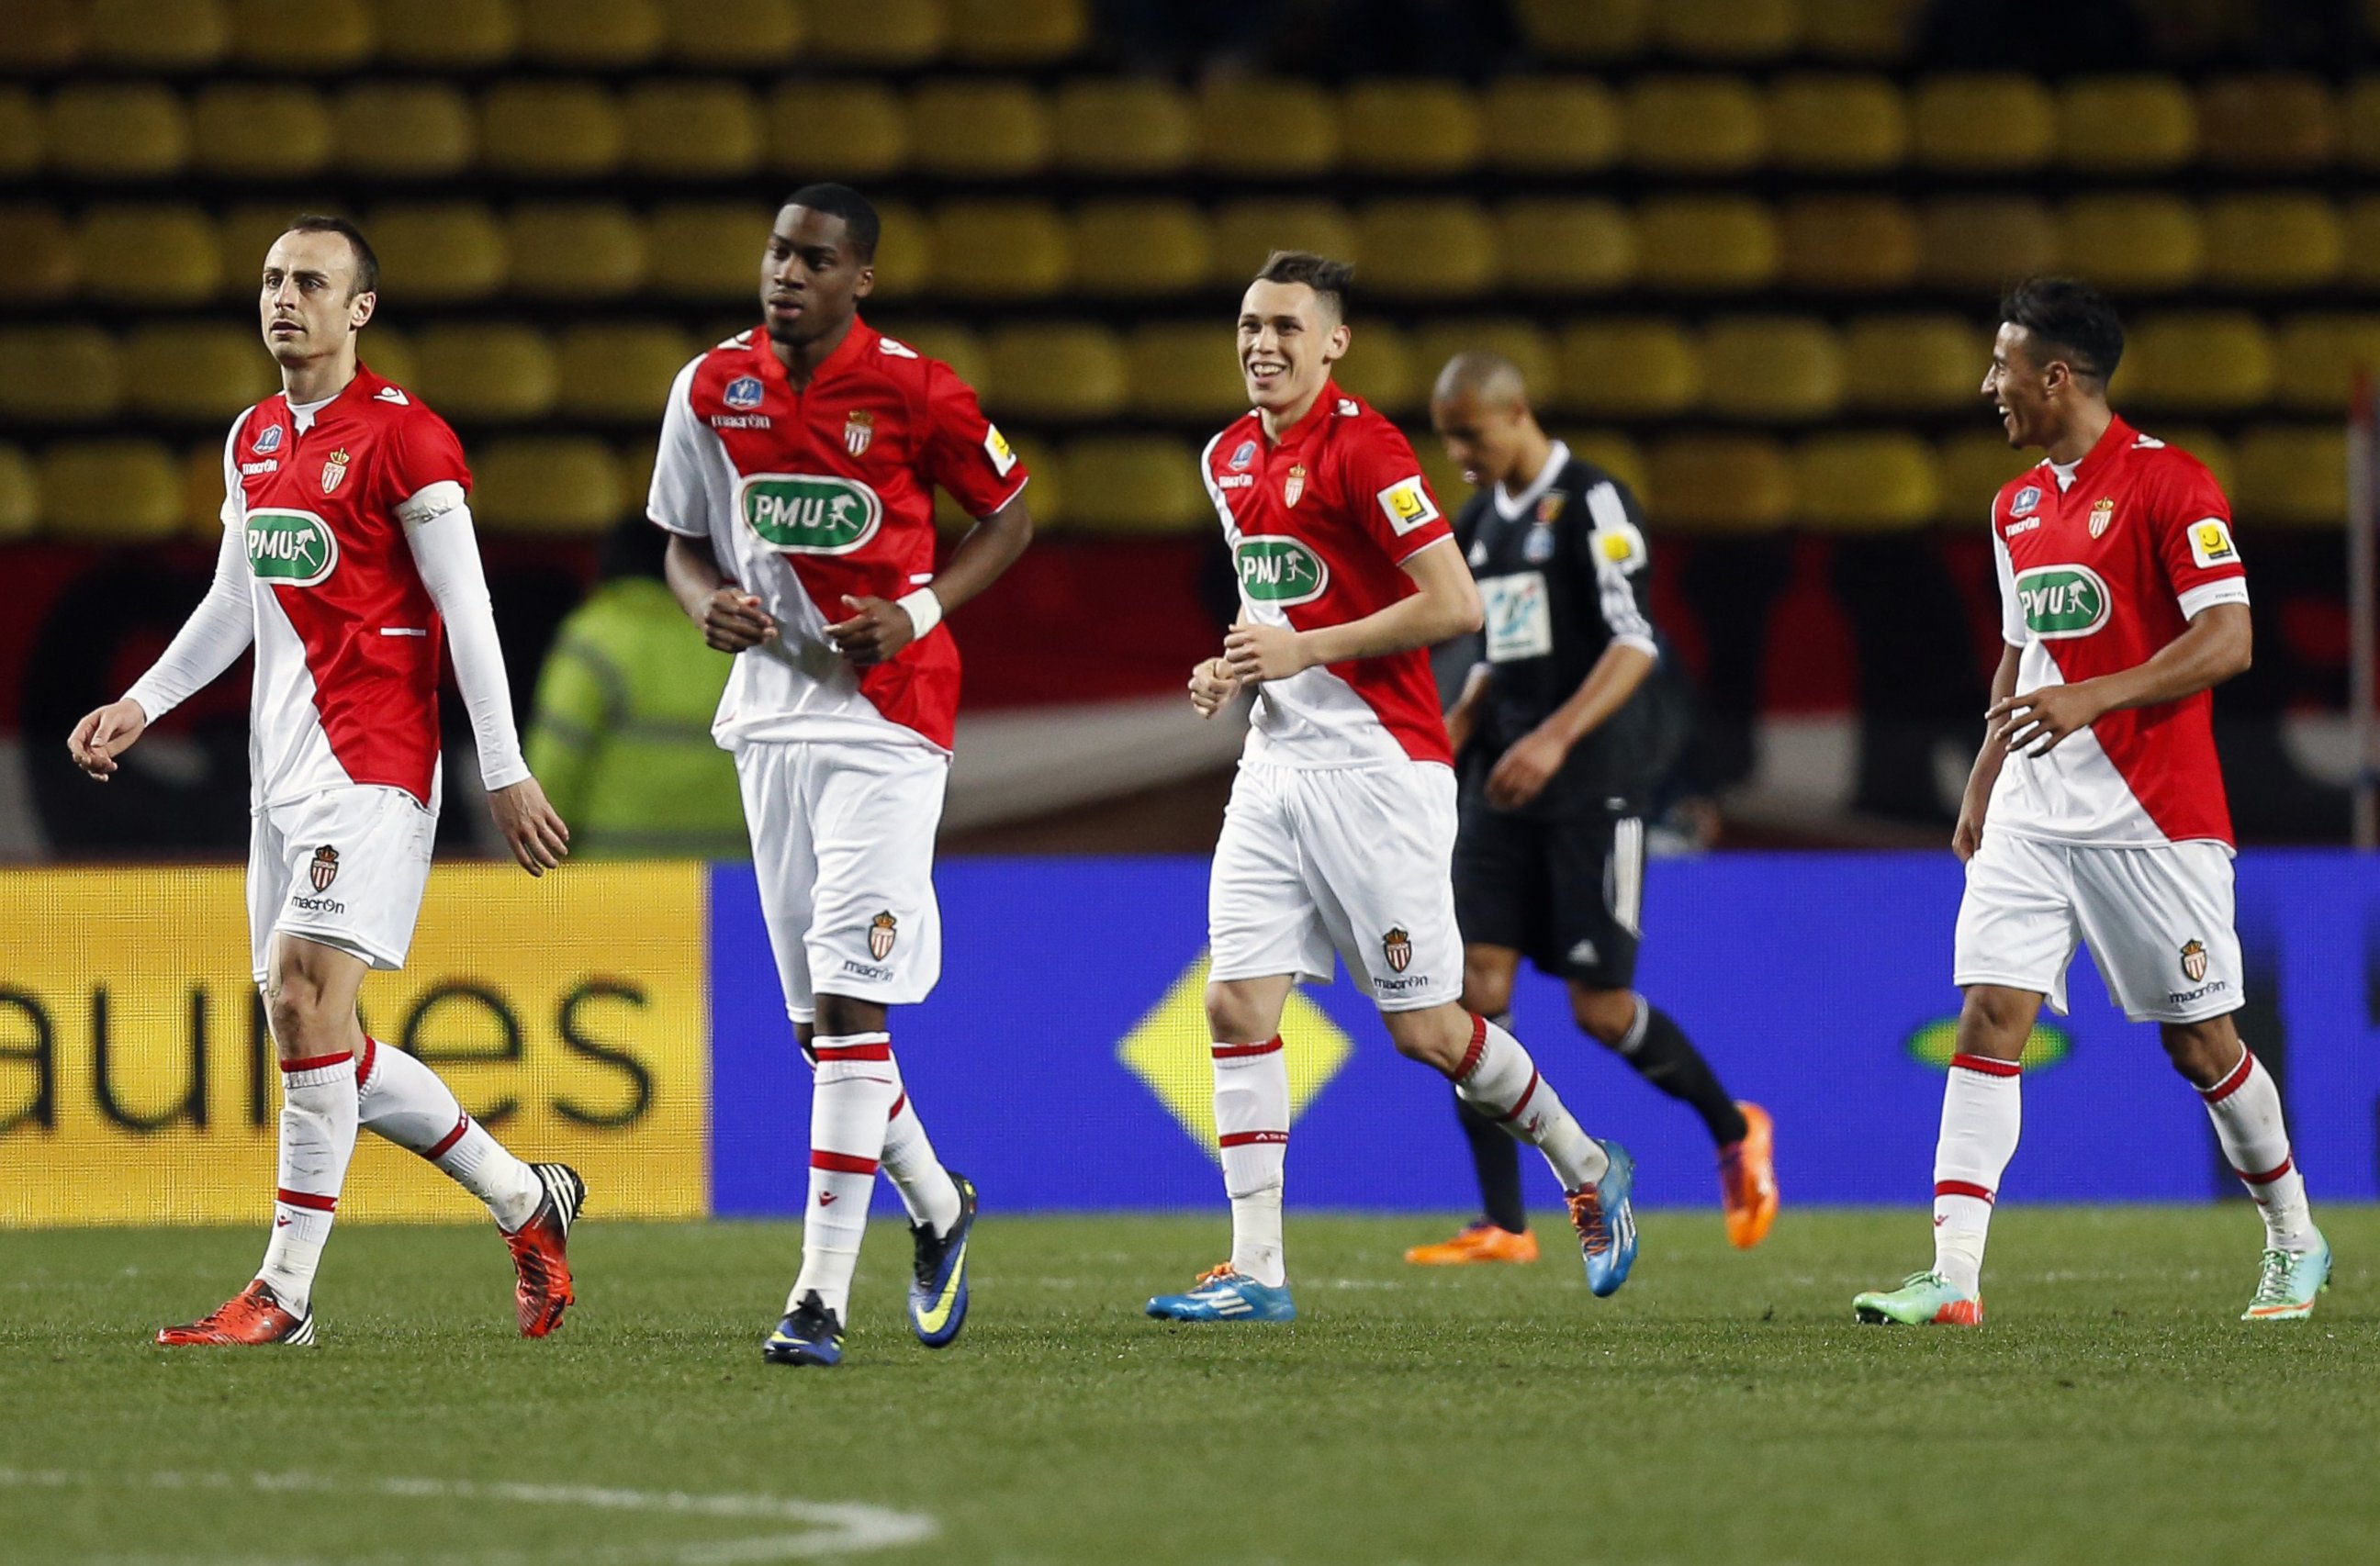 PHOTO: AS Monaco football team members celebrate after scoring during the French Cup football match between AS Monaco and RC Lens, March 26, 2014, at the Louis II  stadium in Monaco.